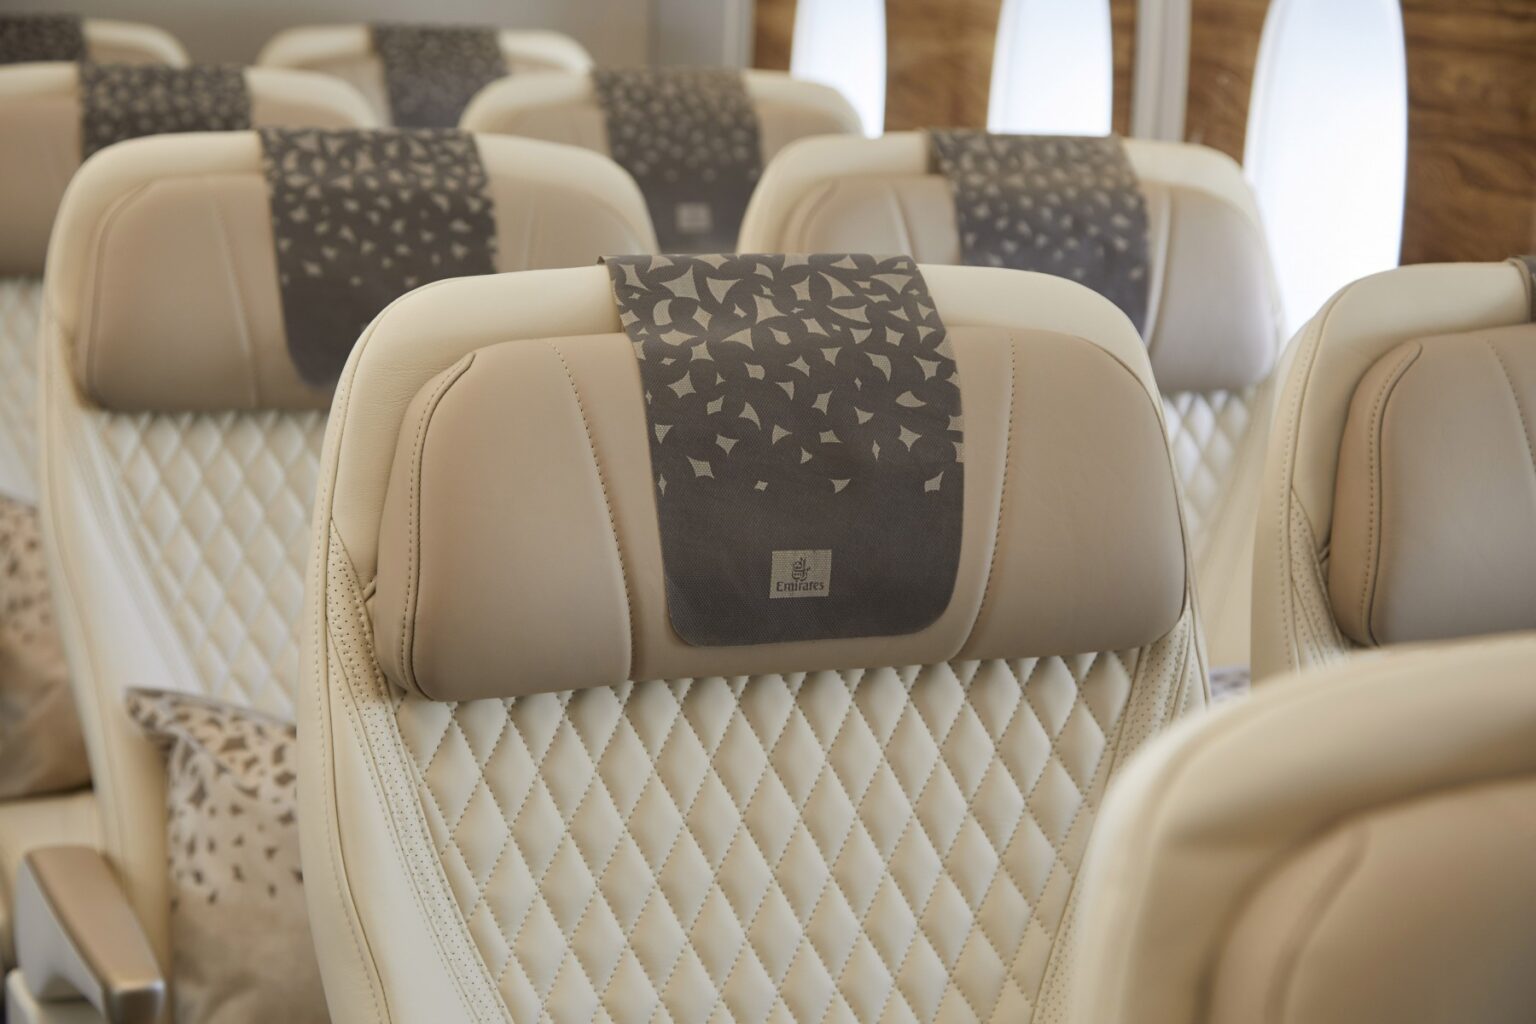 Emirates to present its Premium Economy seats for the first time at Arabian Travel Market 2021 (ATM)